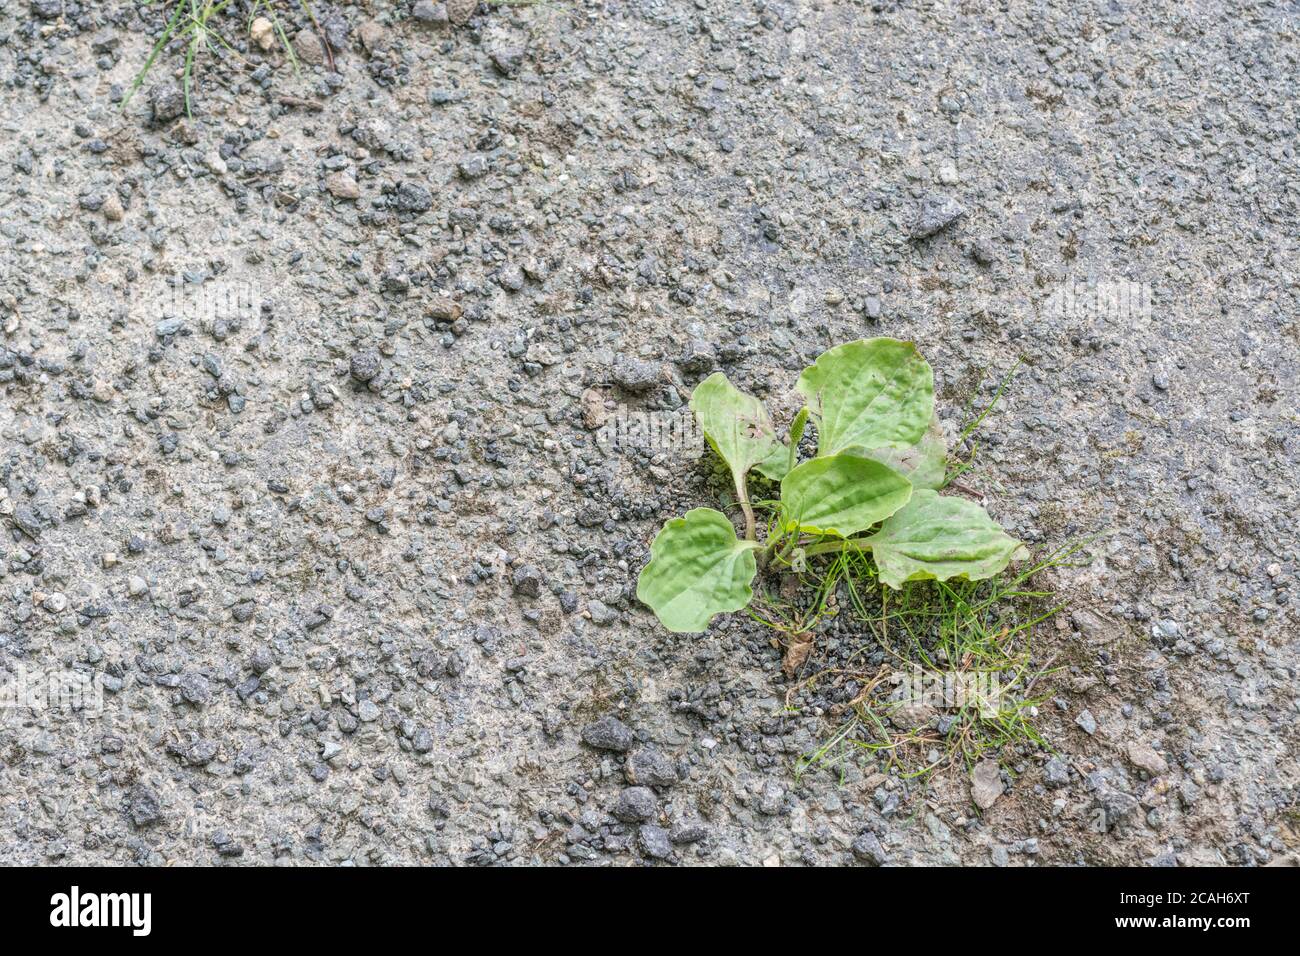 Common UK weed Greater Plantain / Plantago major growing in the baking tarmac of country road in sunshine. Survival of the fittest, & medicinal plant. Stock Photo